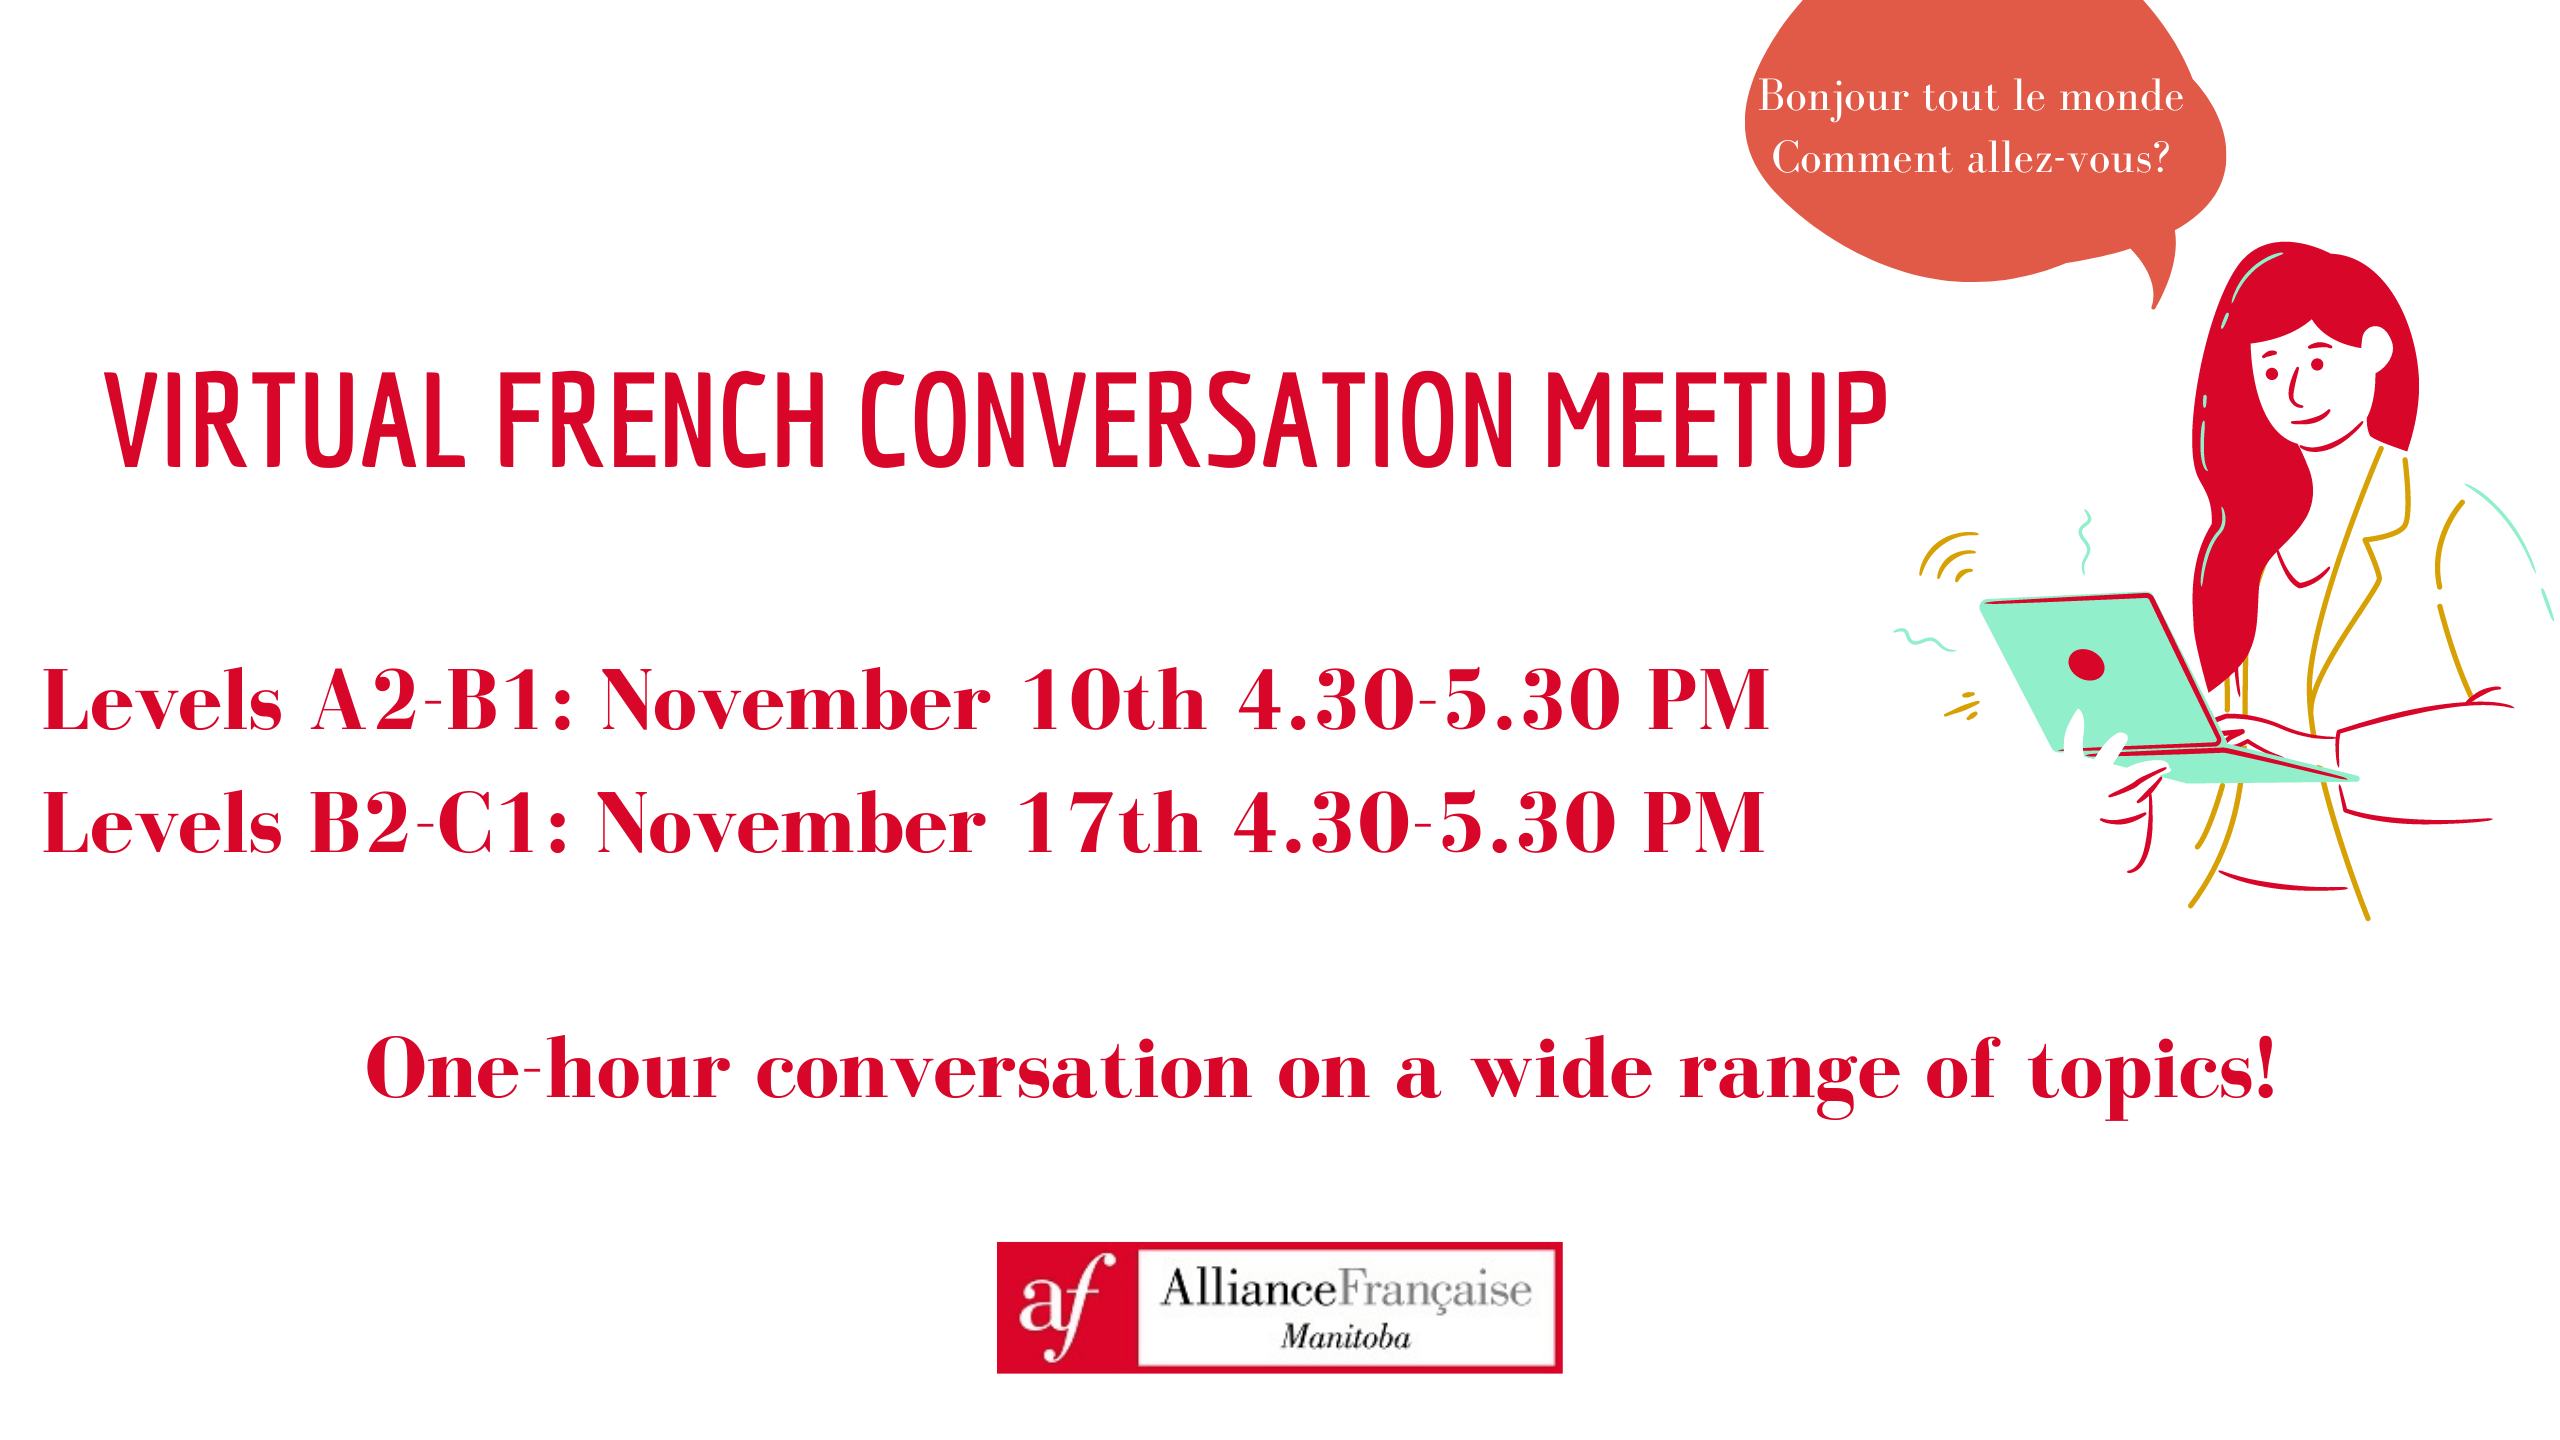 French MEETUP in November (A2-B1)